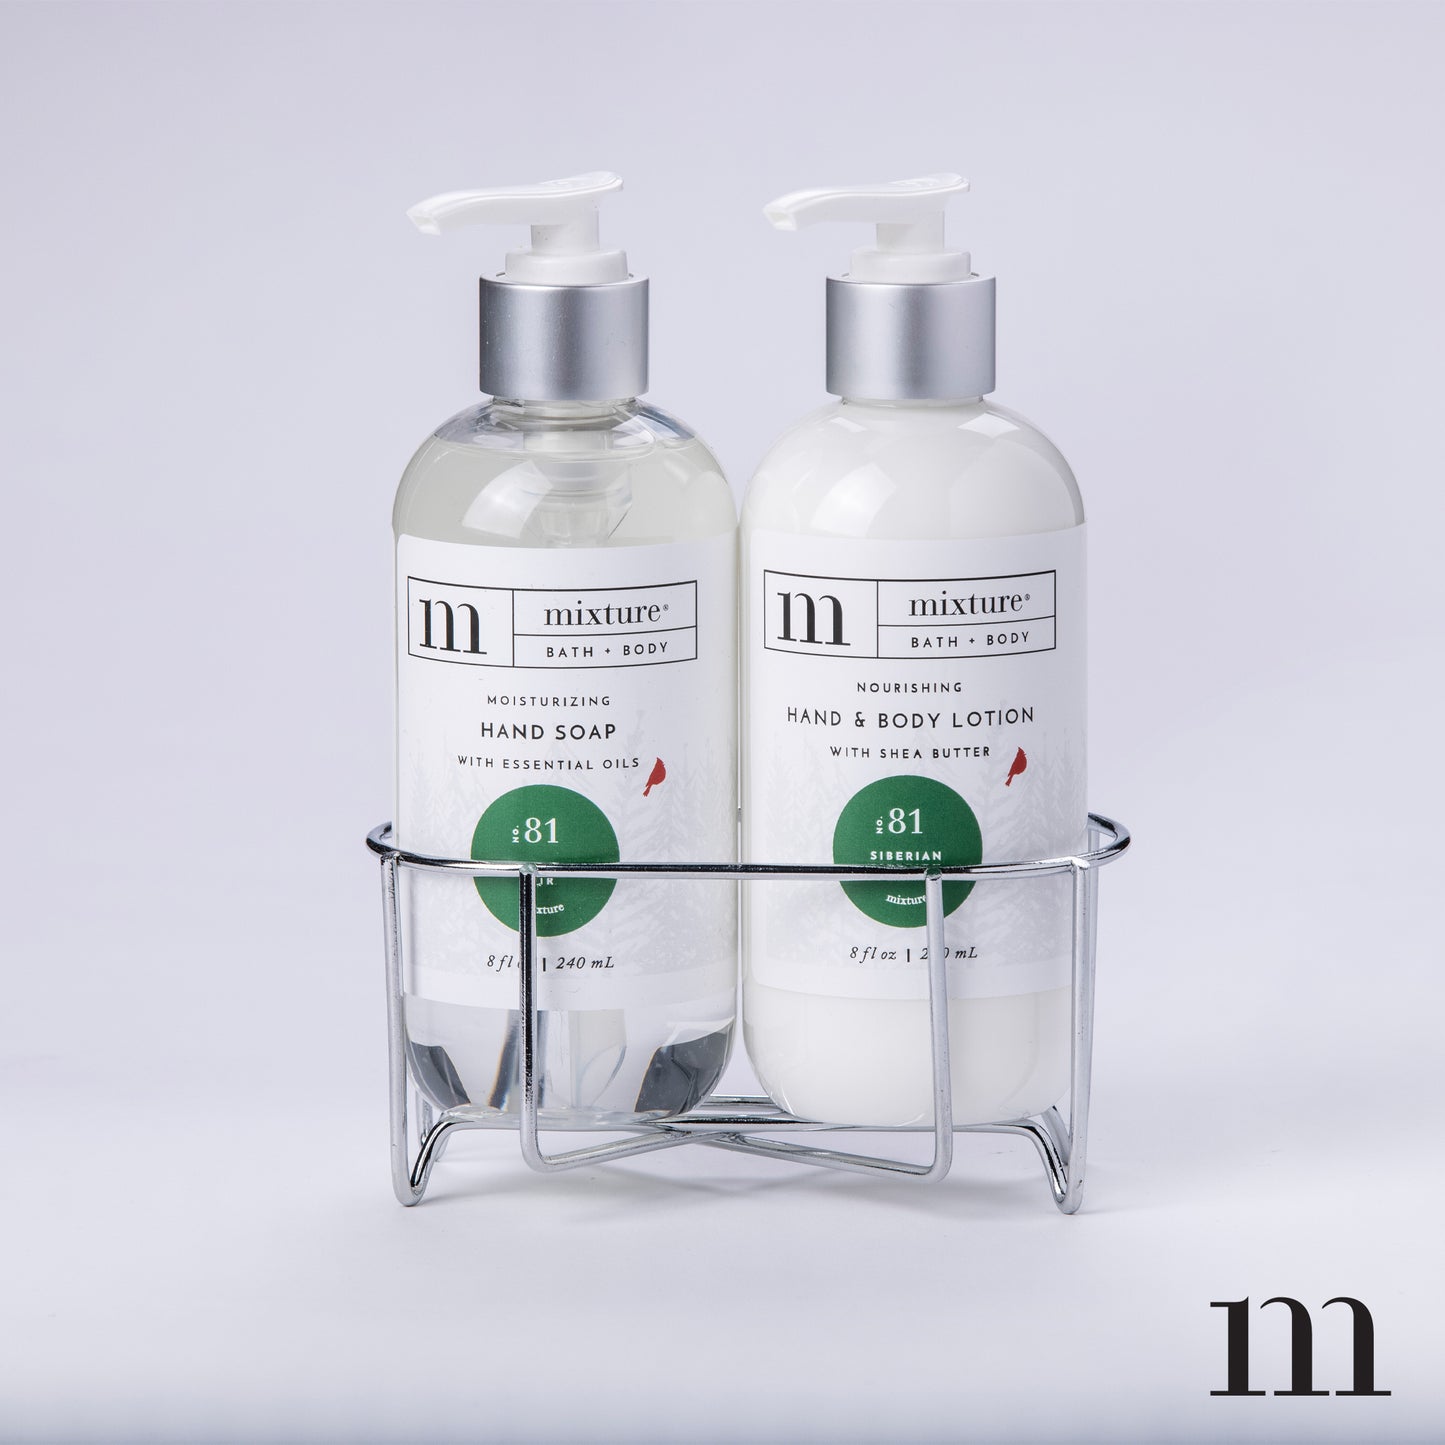 Siberian Fir Hand Soap & Lotion with Silver Caddy